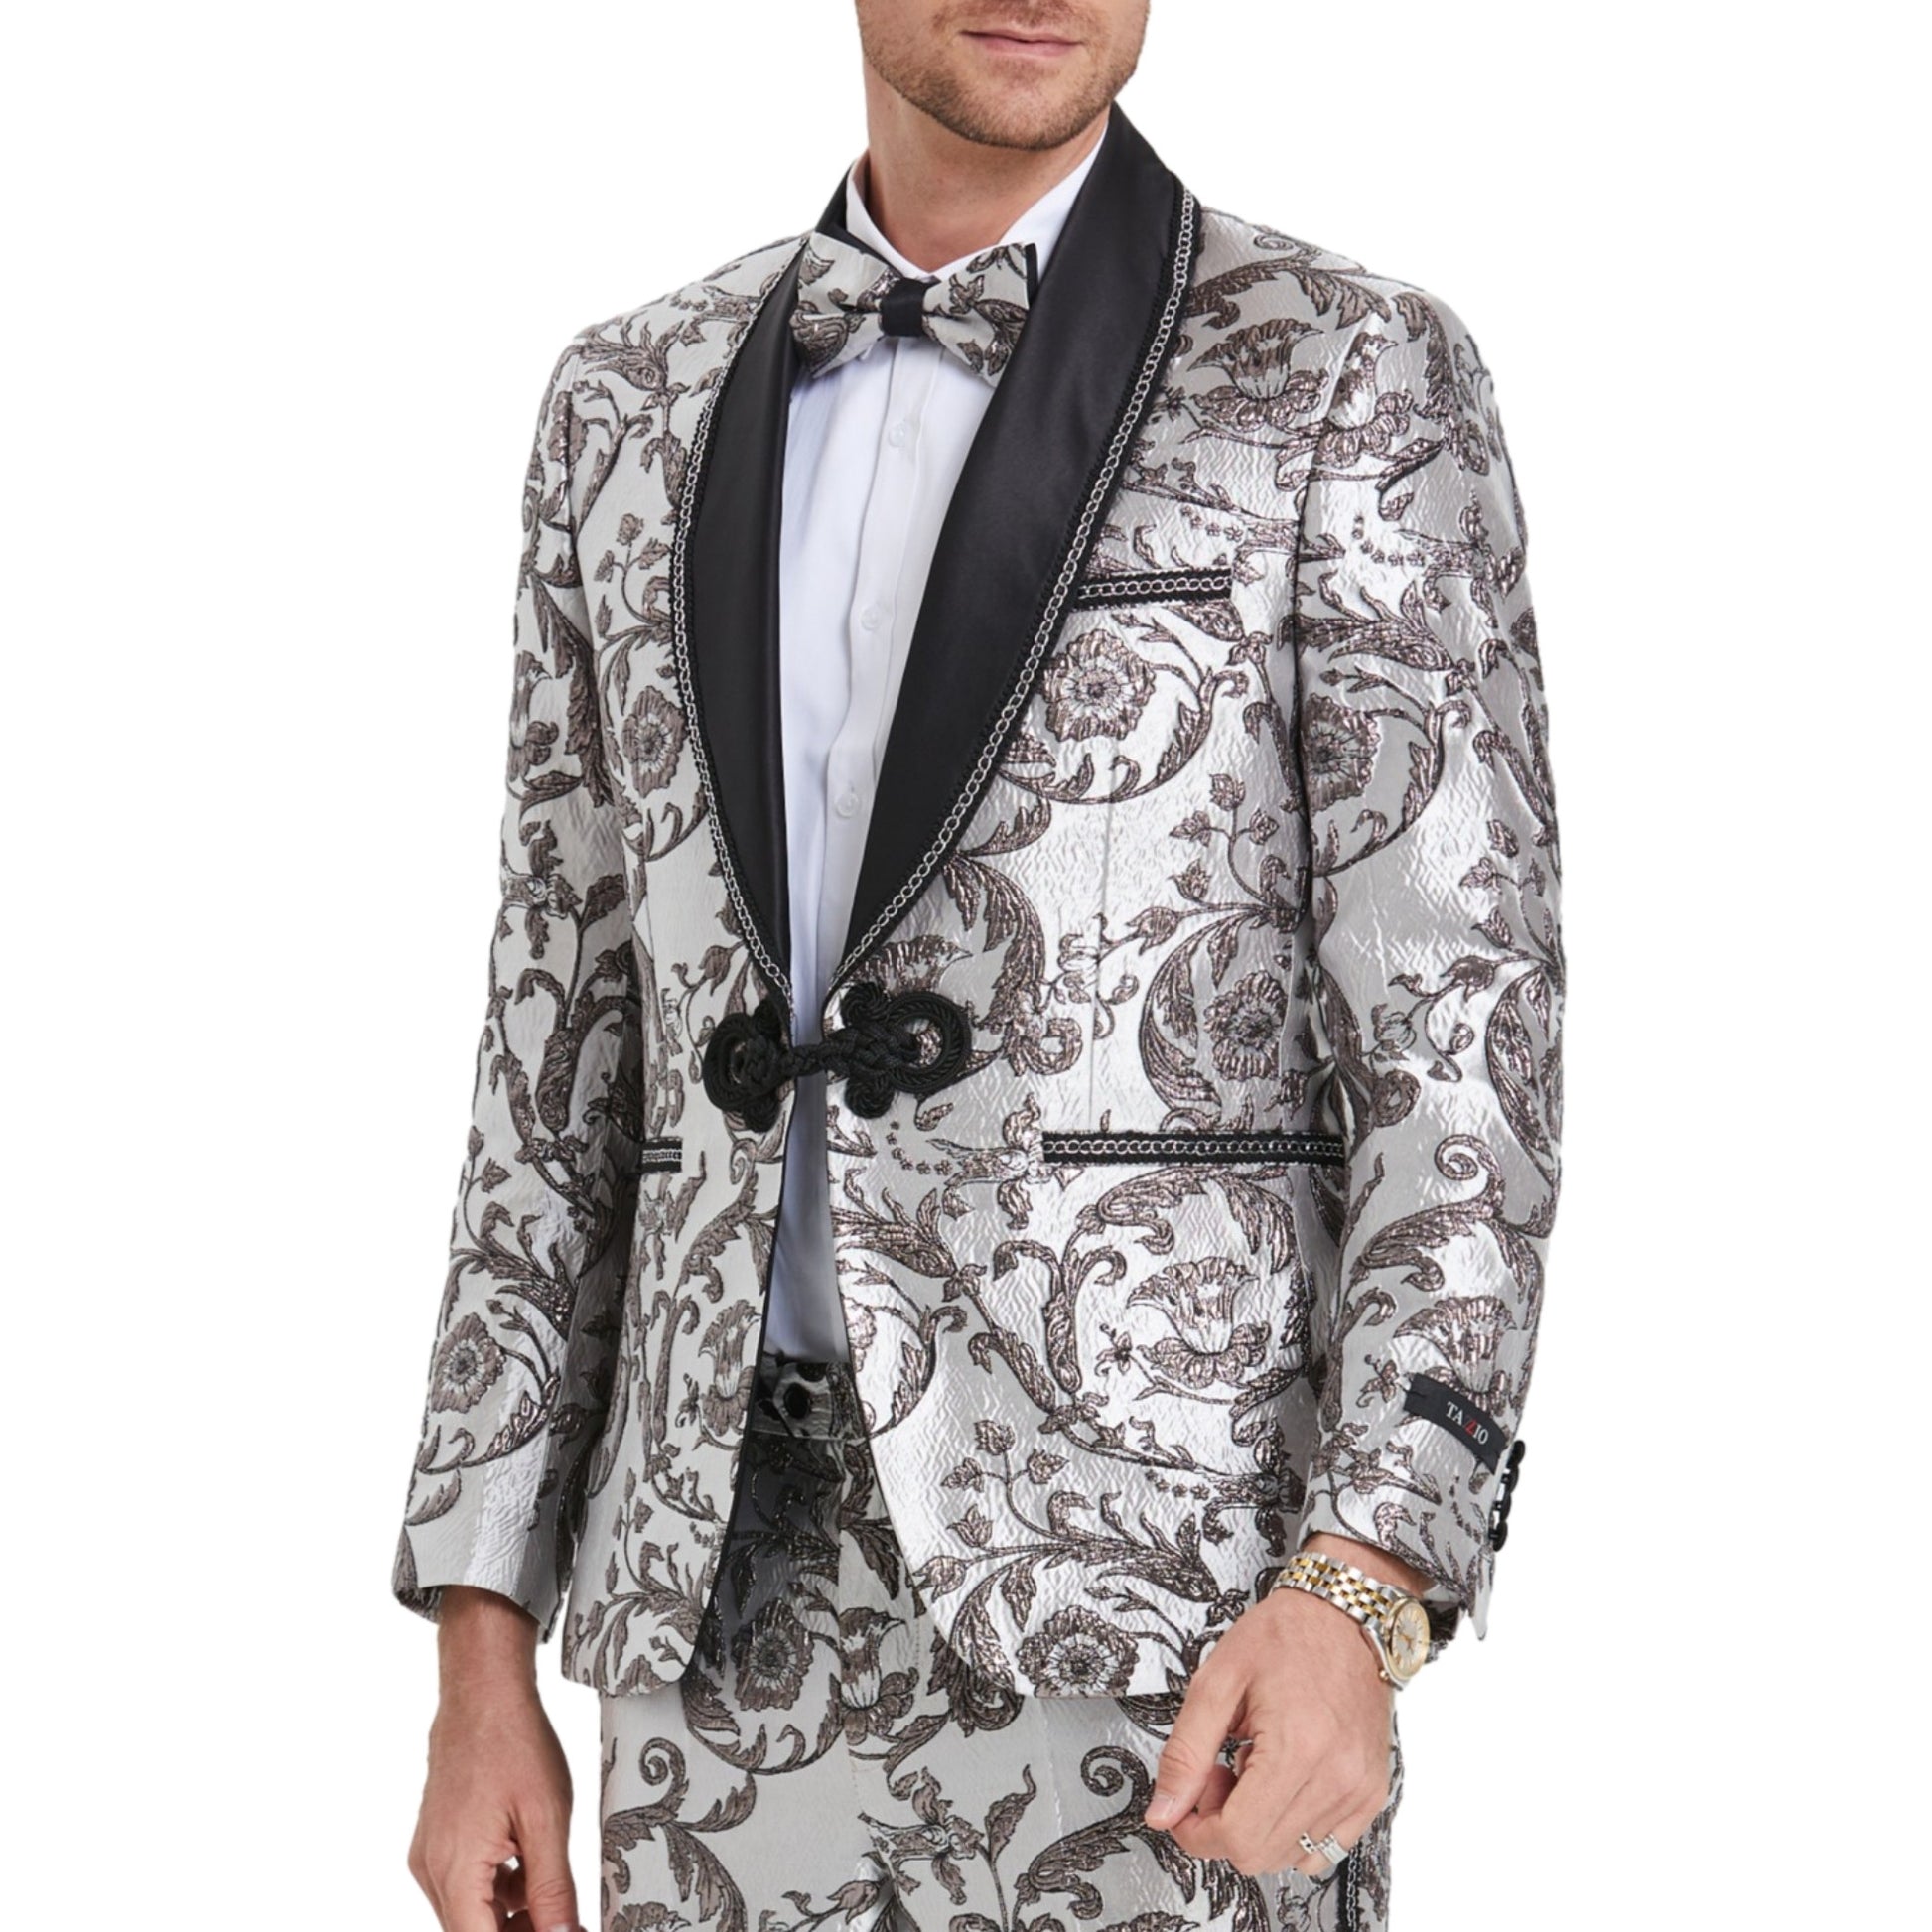 Shiny Silver Tuxedo with Black Paisley, Silver Paisley Design Pants, Black and Silver Lapel Detail, Shiny Silver Paisley Bowtie, Slim Fit Tuxedo Style.